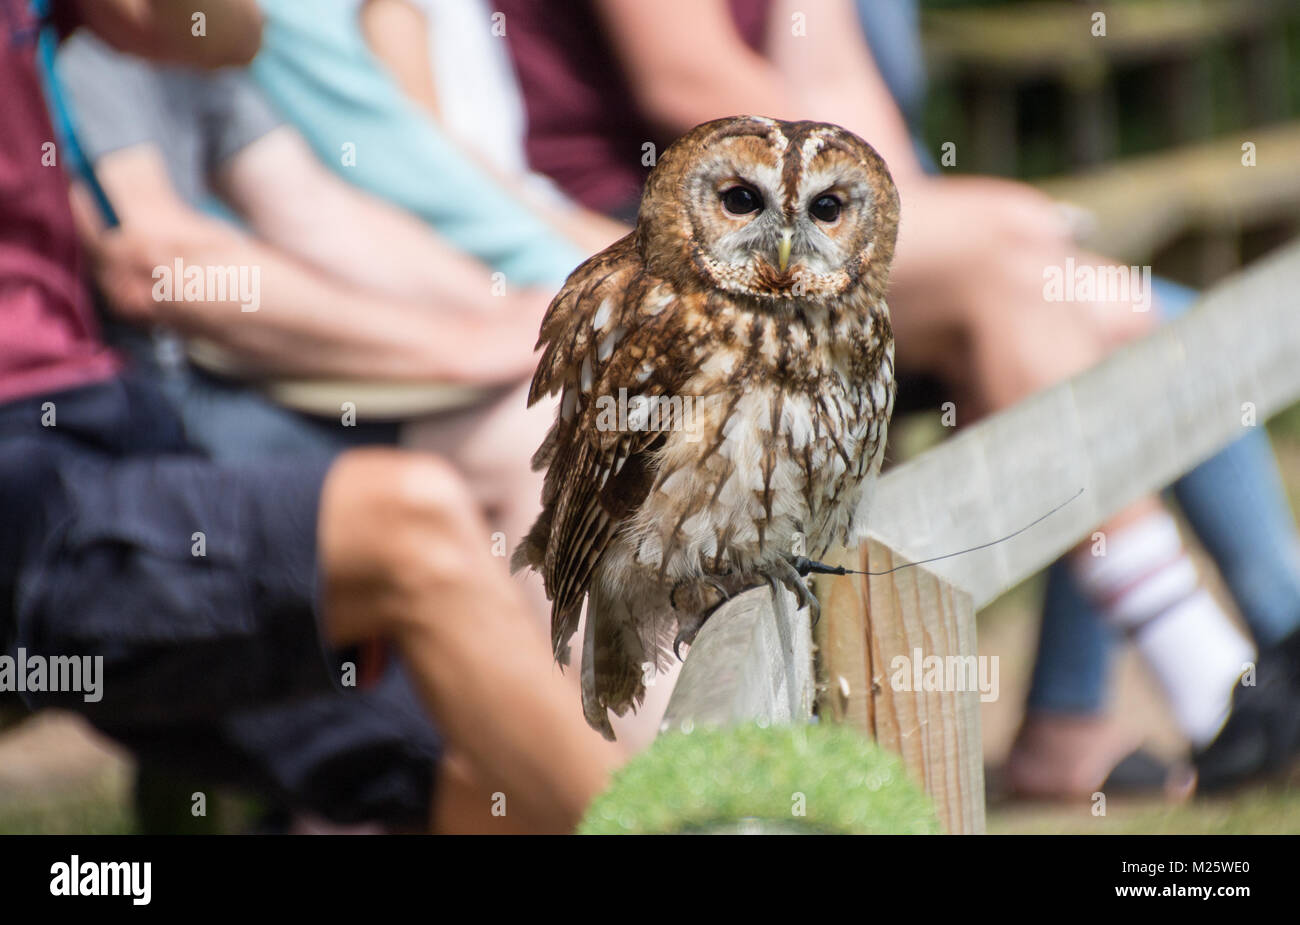 Tawny Owl resting on a fence during a flying display Stock Photo